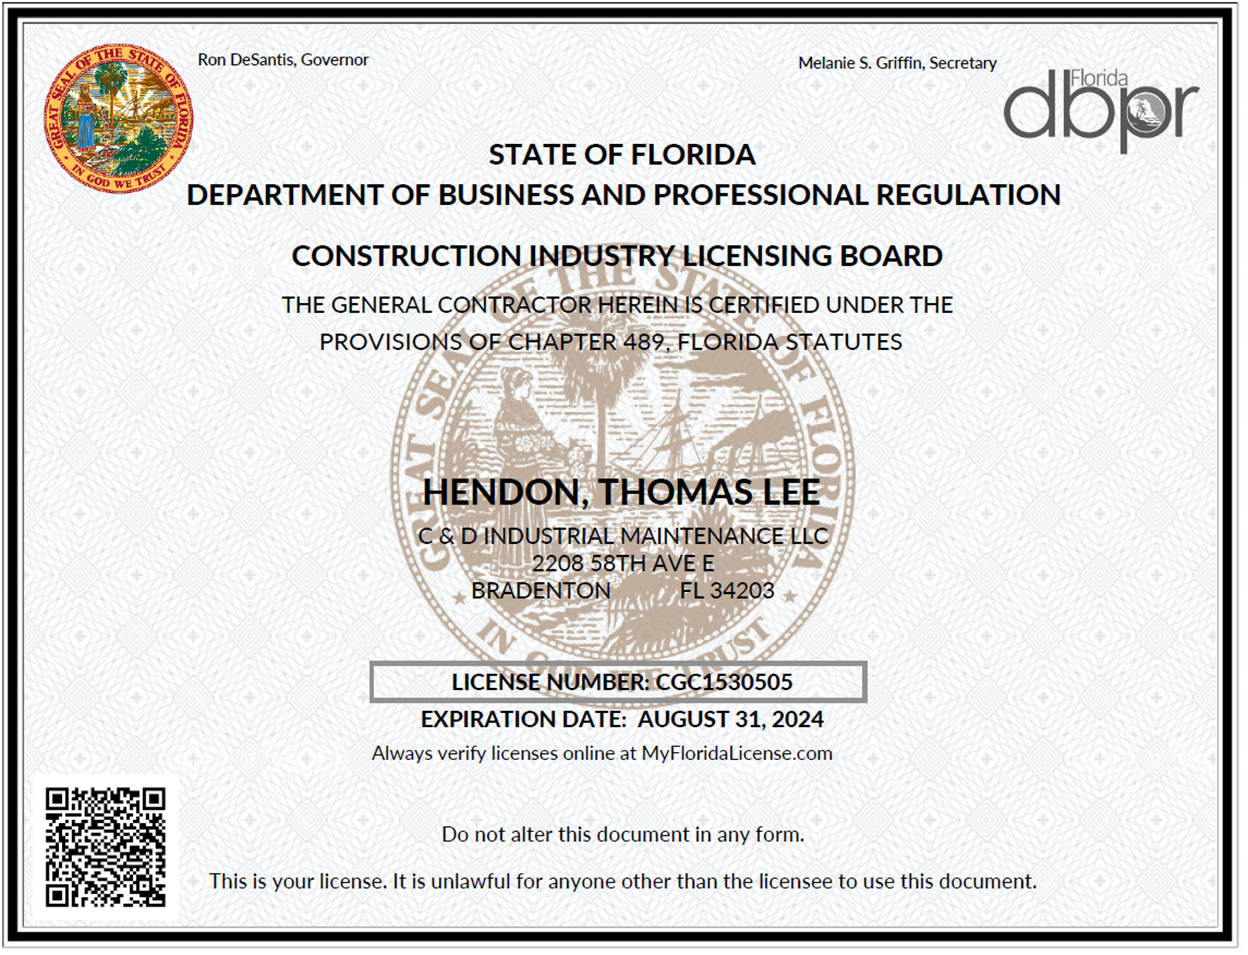 A certificate from the State of Florida Department of Business and Professional Regulation - Bradenton, FL - C&D Industrial Maintenance